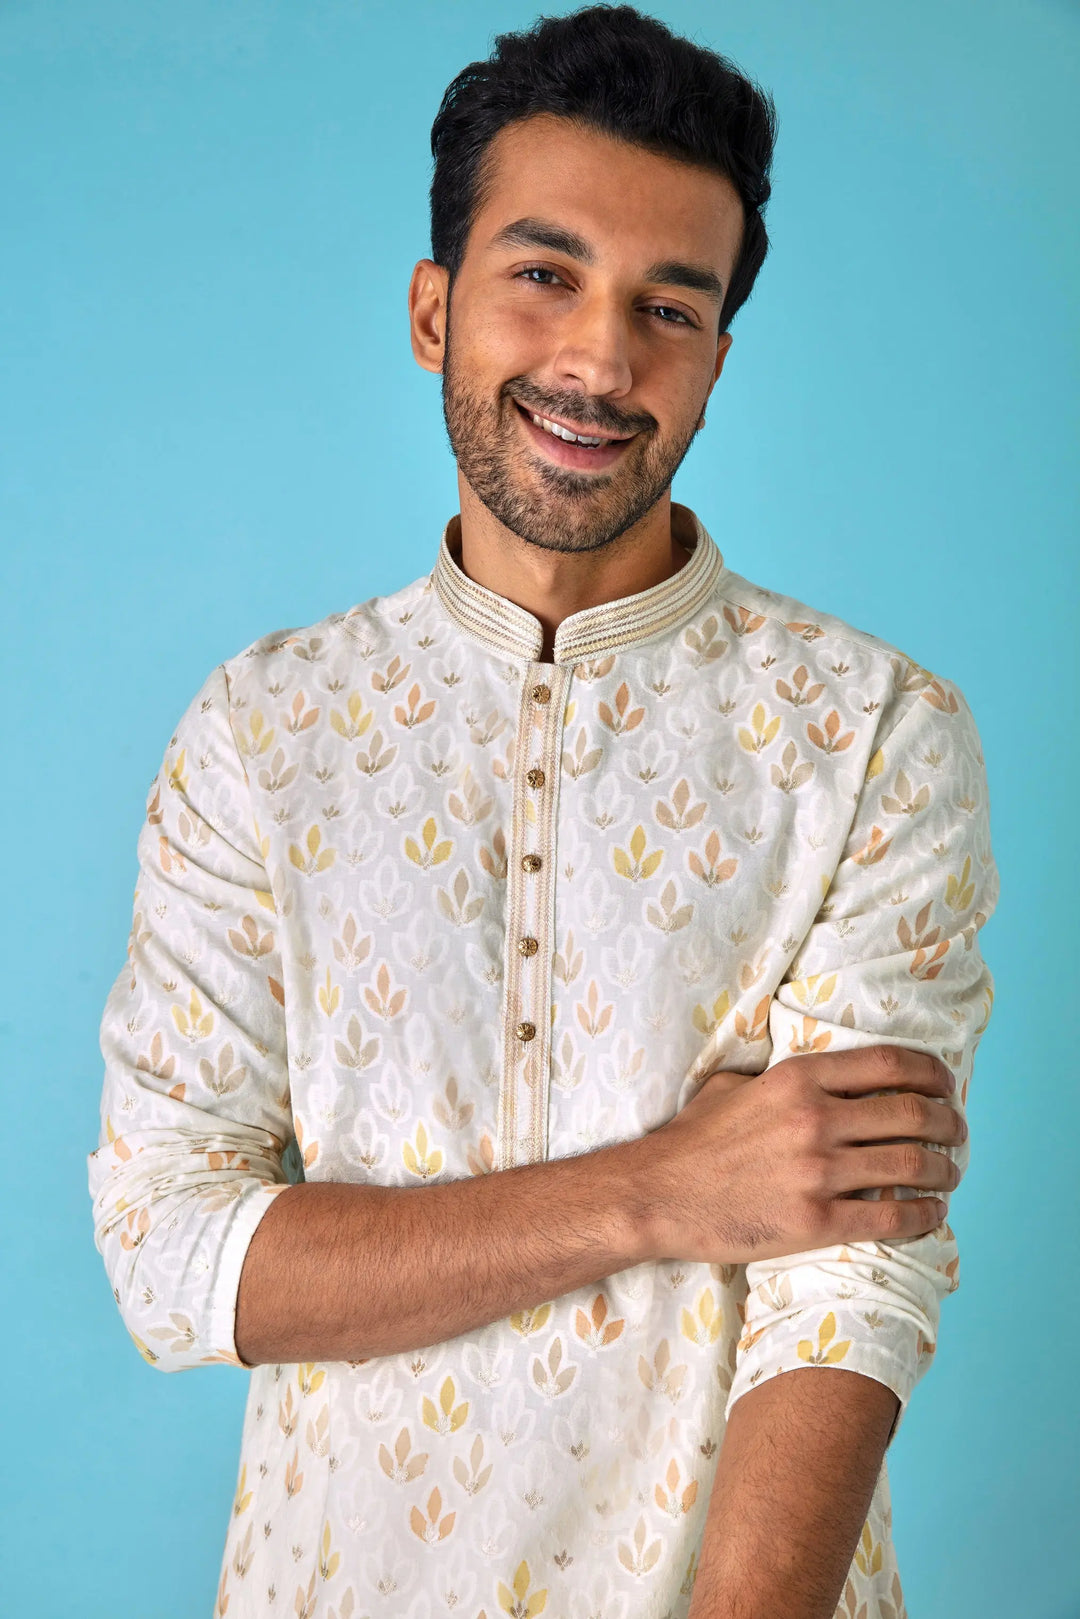 Leafy Affair: Ivory Kurta with Leaf Motifs in Yellow, Peach, and White - Asuka Couture